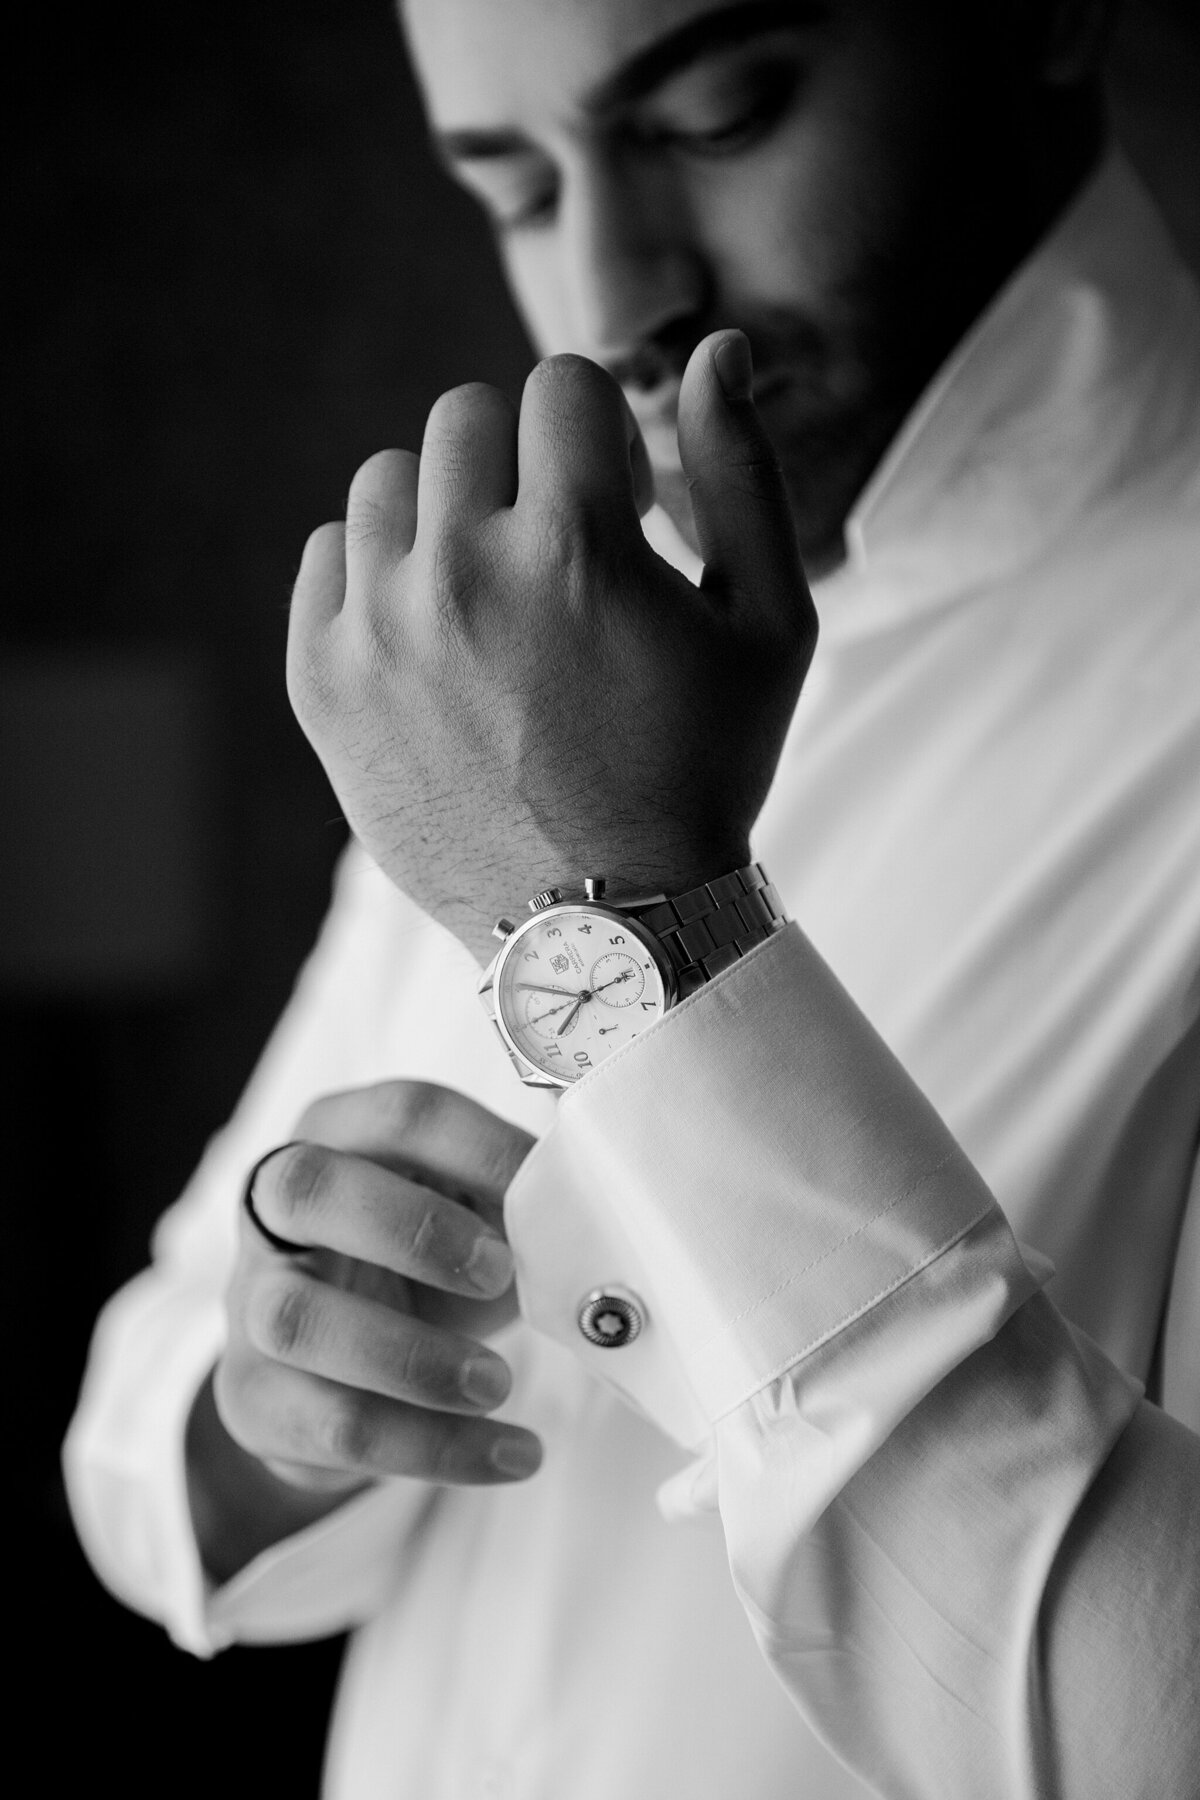 Black and white portrait of a groom adjusting his cufflink and showing off his watch on his wedding day in Dallas, Texas.